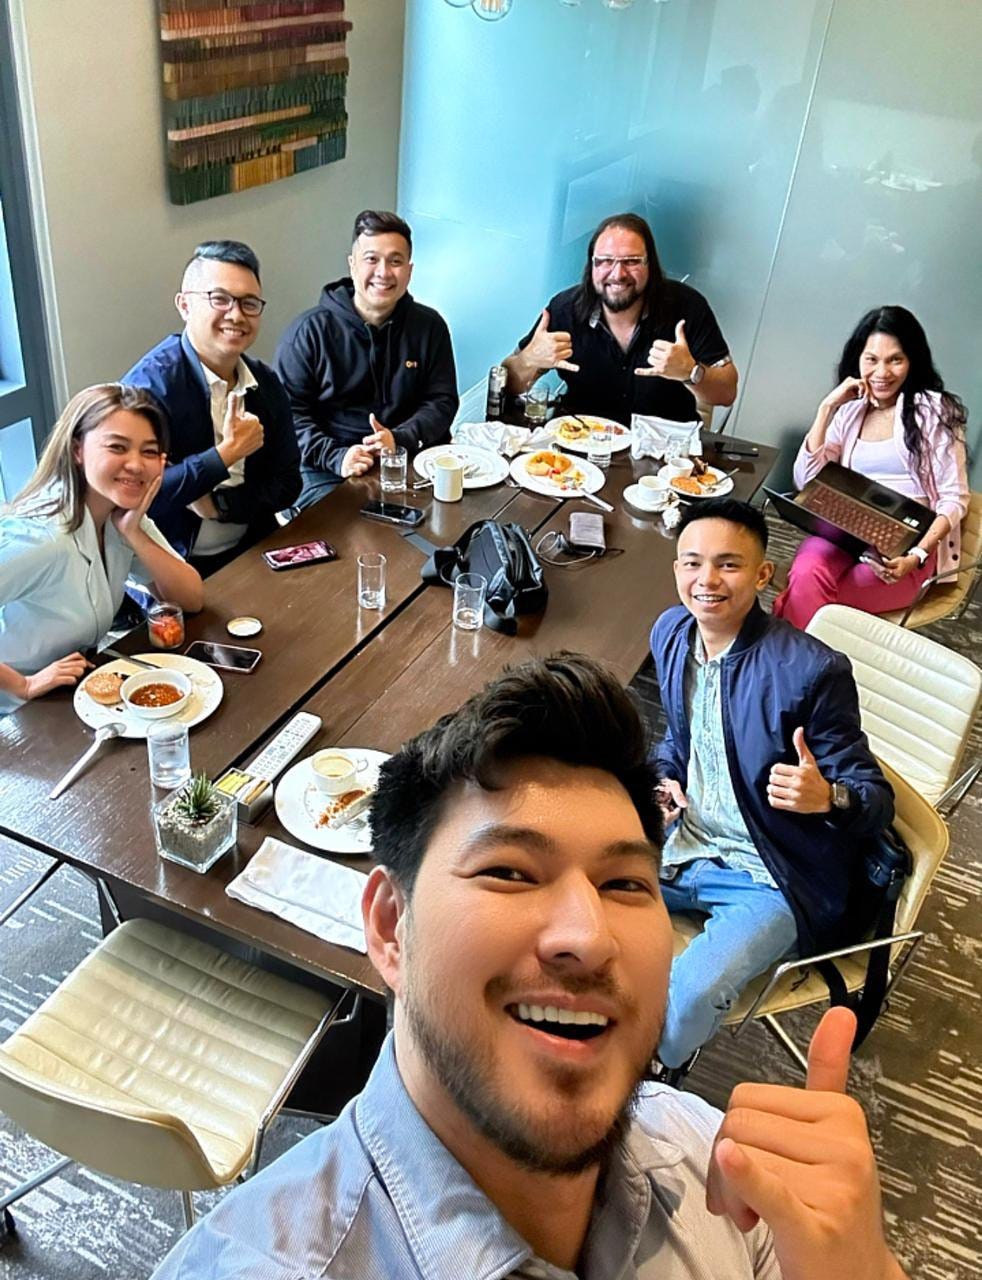 Ian Utile of NFT.NYC with top Filipino Web3 influencers, including Giu Comia, CryptoPareh, and Proftoff and cofounders of AltSwitch — Carl Munsayac and Kaye Labay